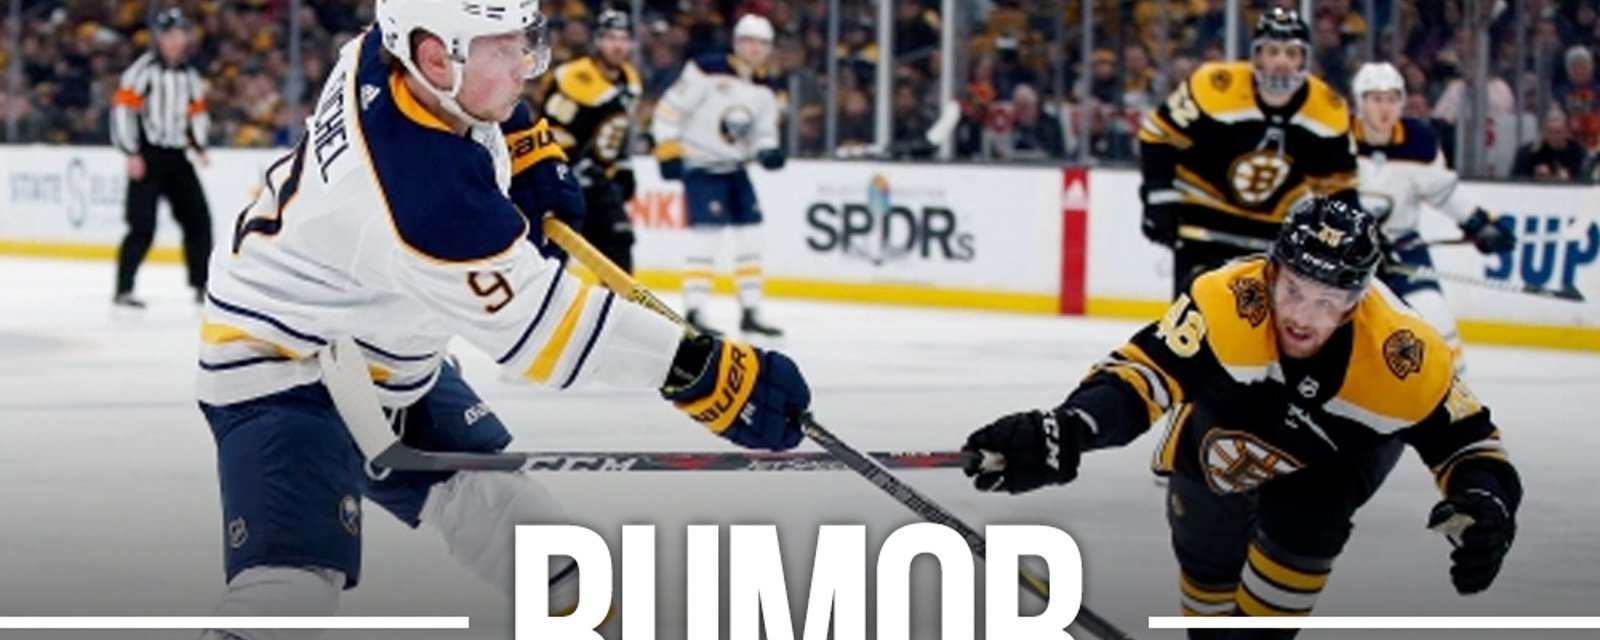 Report: Bruins “in communication” with Sabres on potential Eichel trade